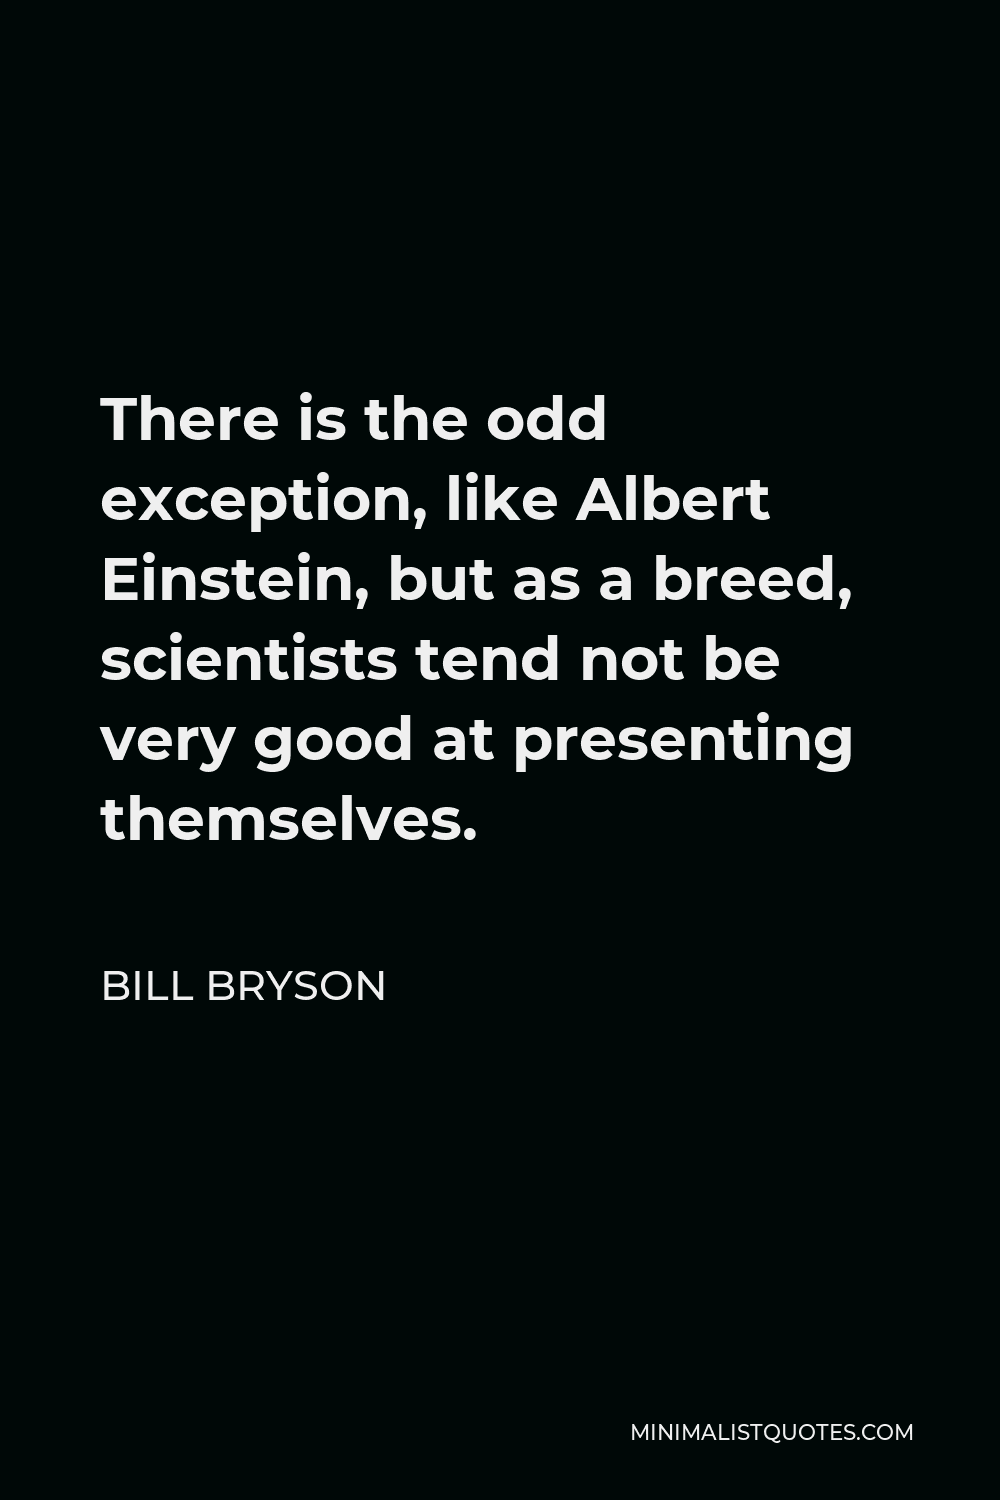 Bill Bryson Quote - There is the odd exception, like Albert Einstein, but as a breed, scientists tend not be very good at presenting themselves.